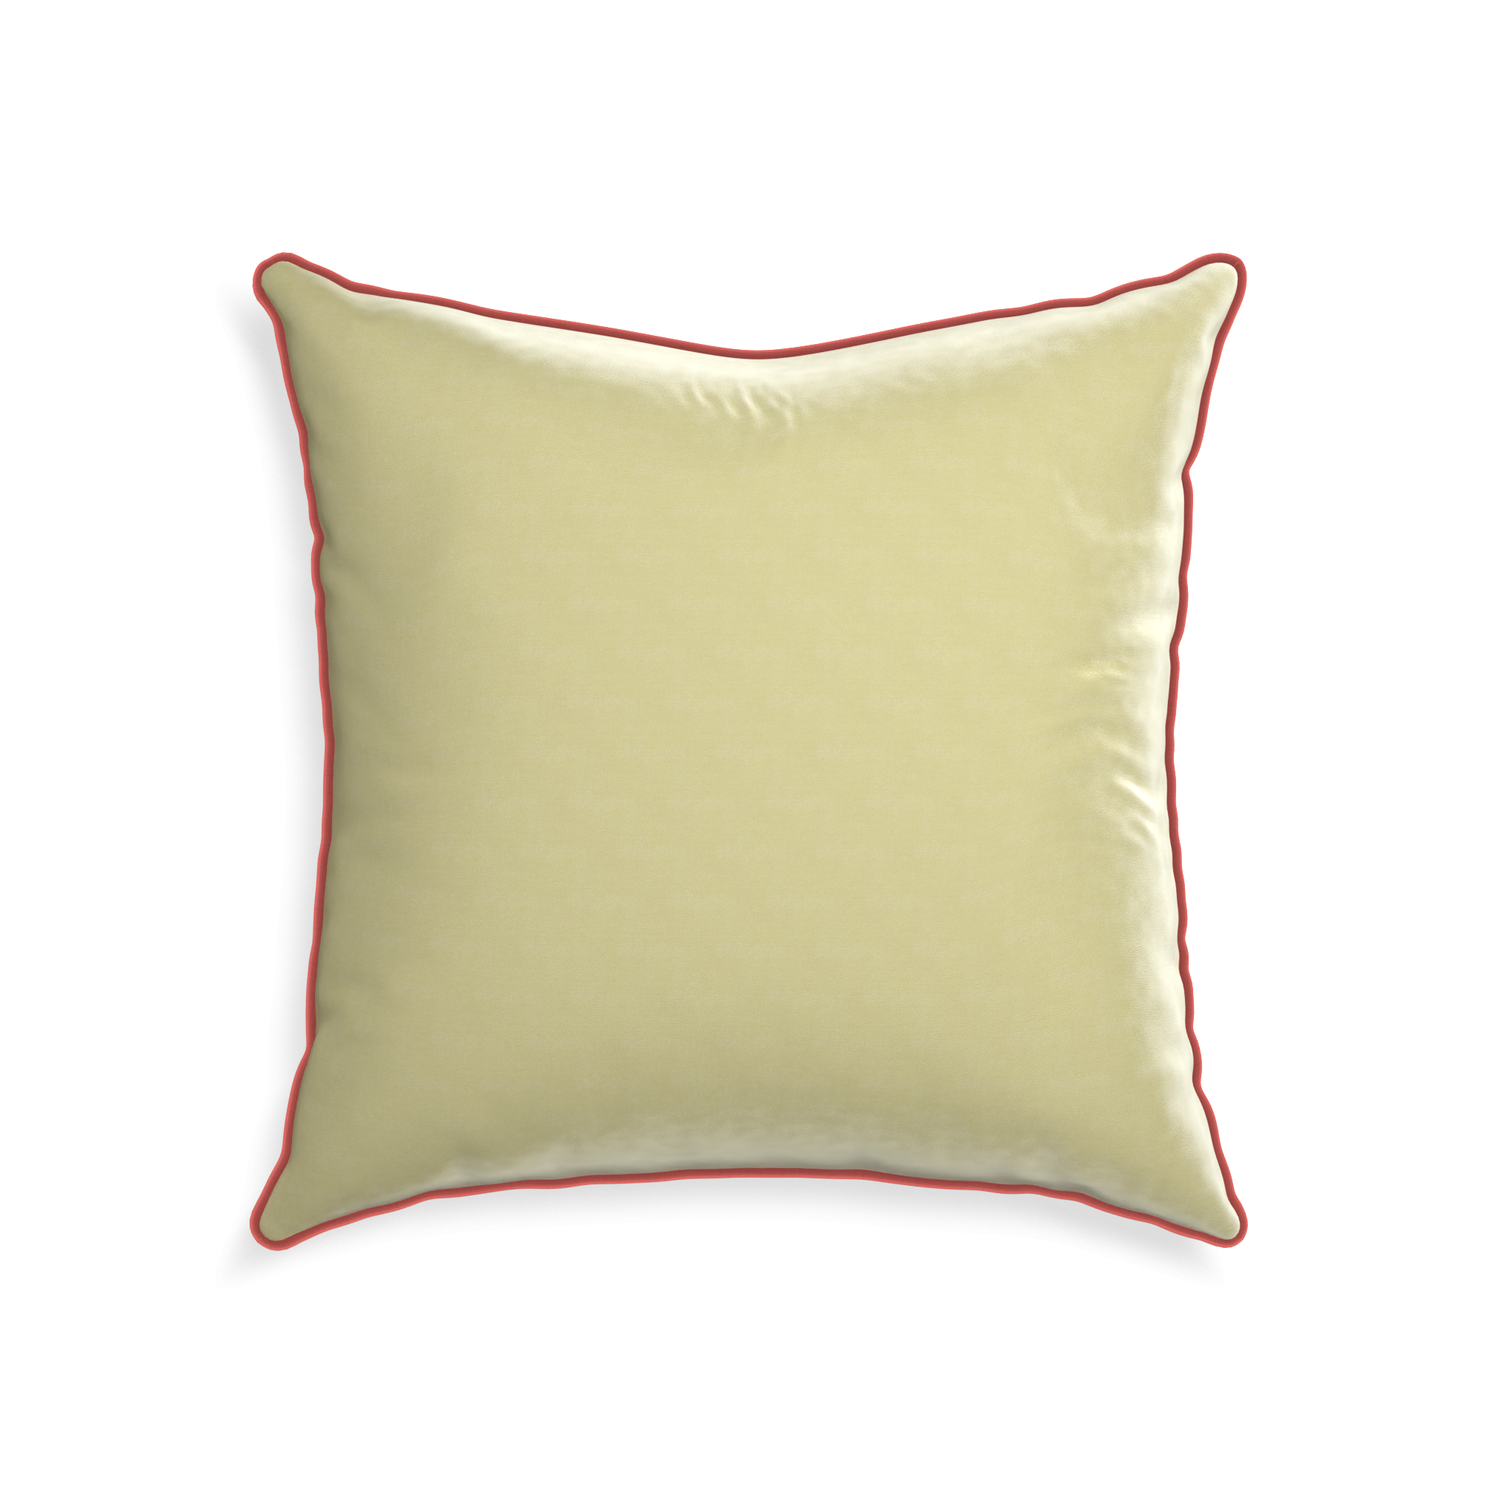 22-square pear velvet custom pillow with c piping on white background